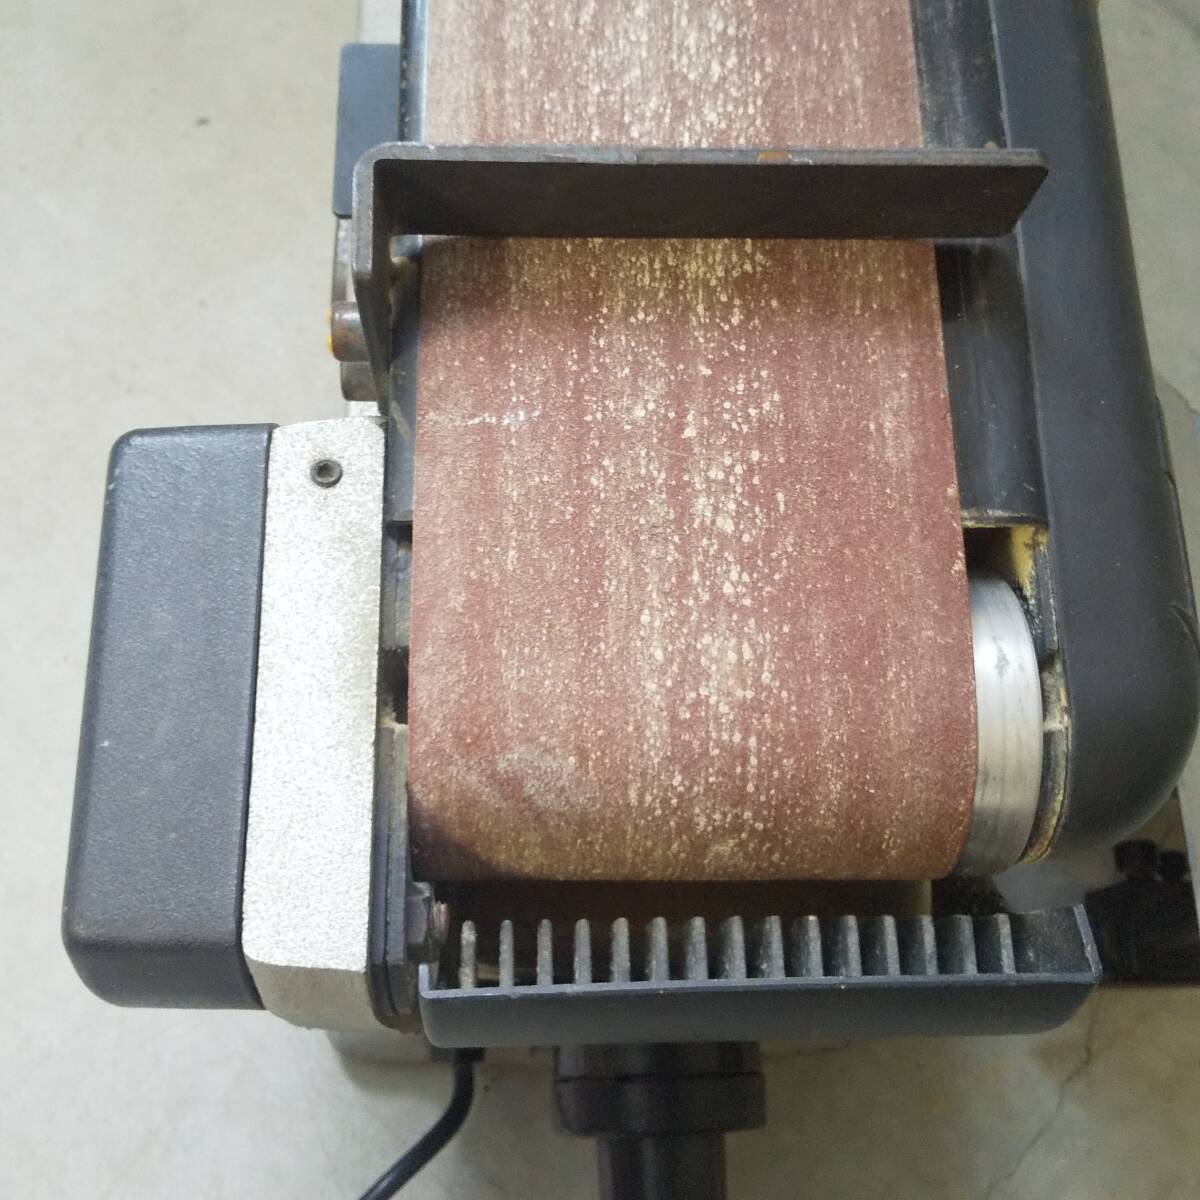 * Fujiwara industry SK11 belt disk Thunder BDS-100N electric grinder non-ferrous metal * wood etc.. small articles grinding DIY present condition operation goods direct pickup possibility *K2371